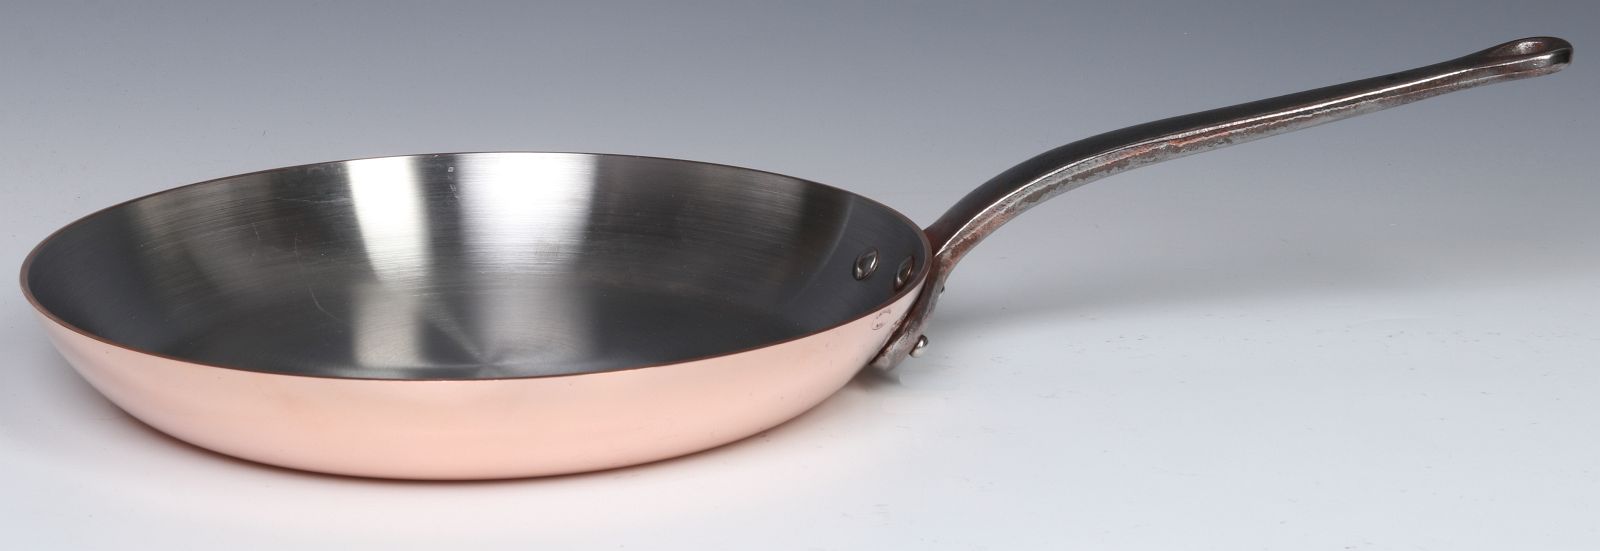 MAUVIEL M'HERITAGE LARGE FRENCH COPPER SKILLET